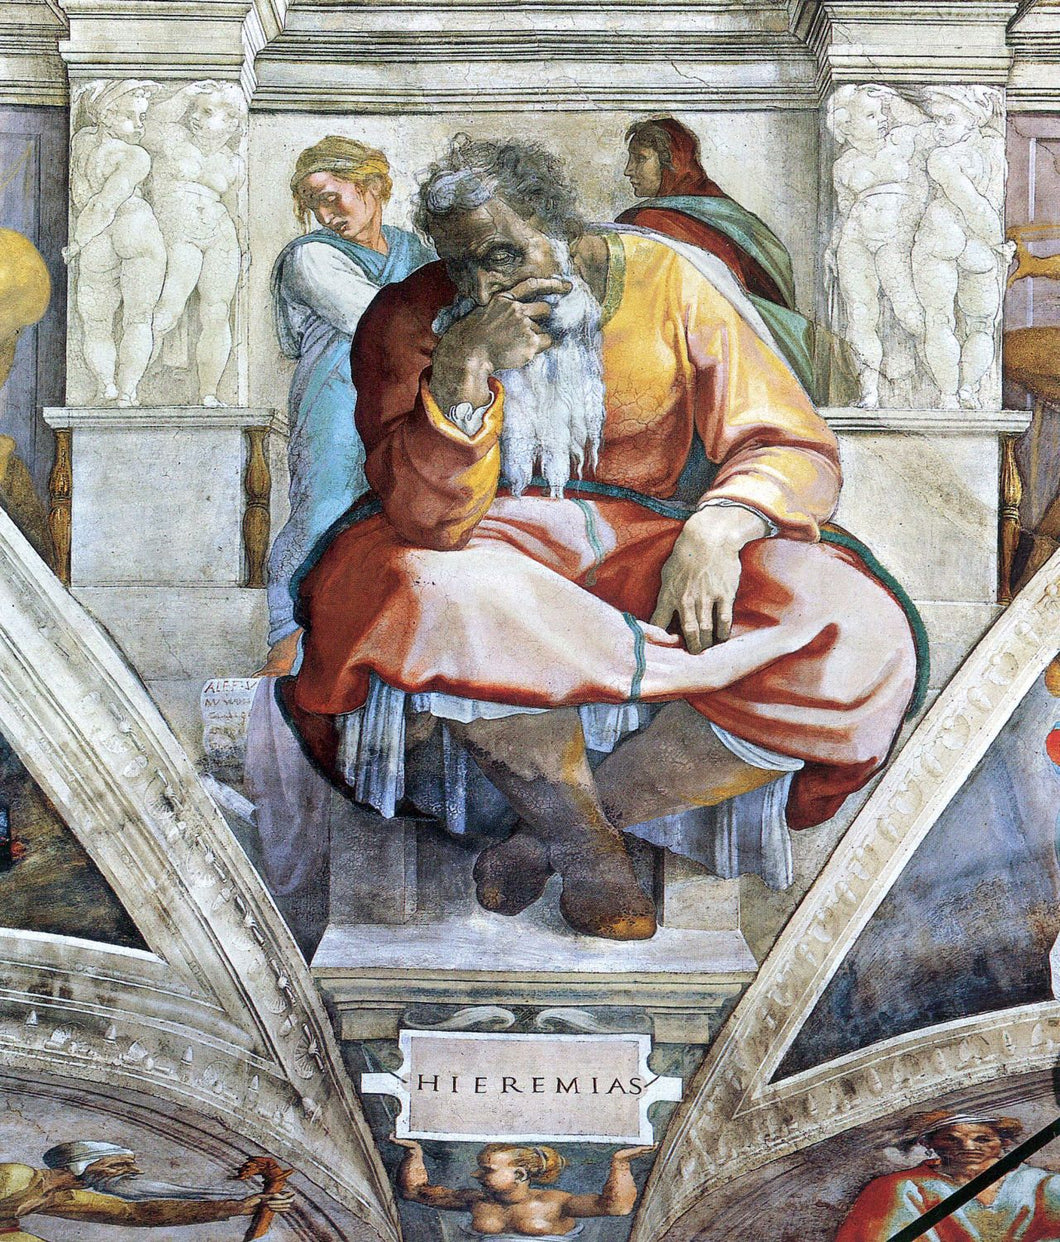 Michelanglo - The Prophet Jeremiah by Michelangelo